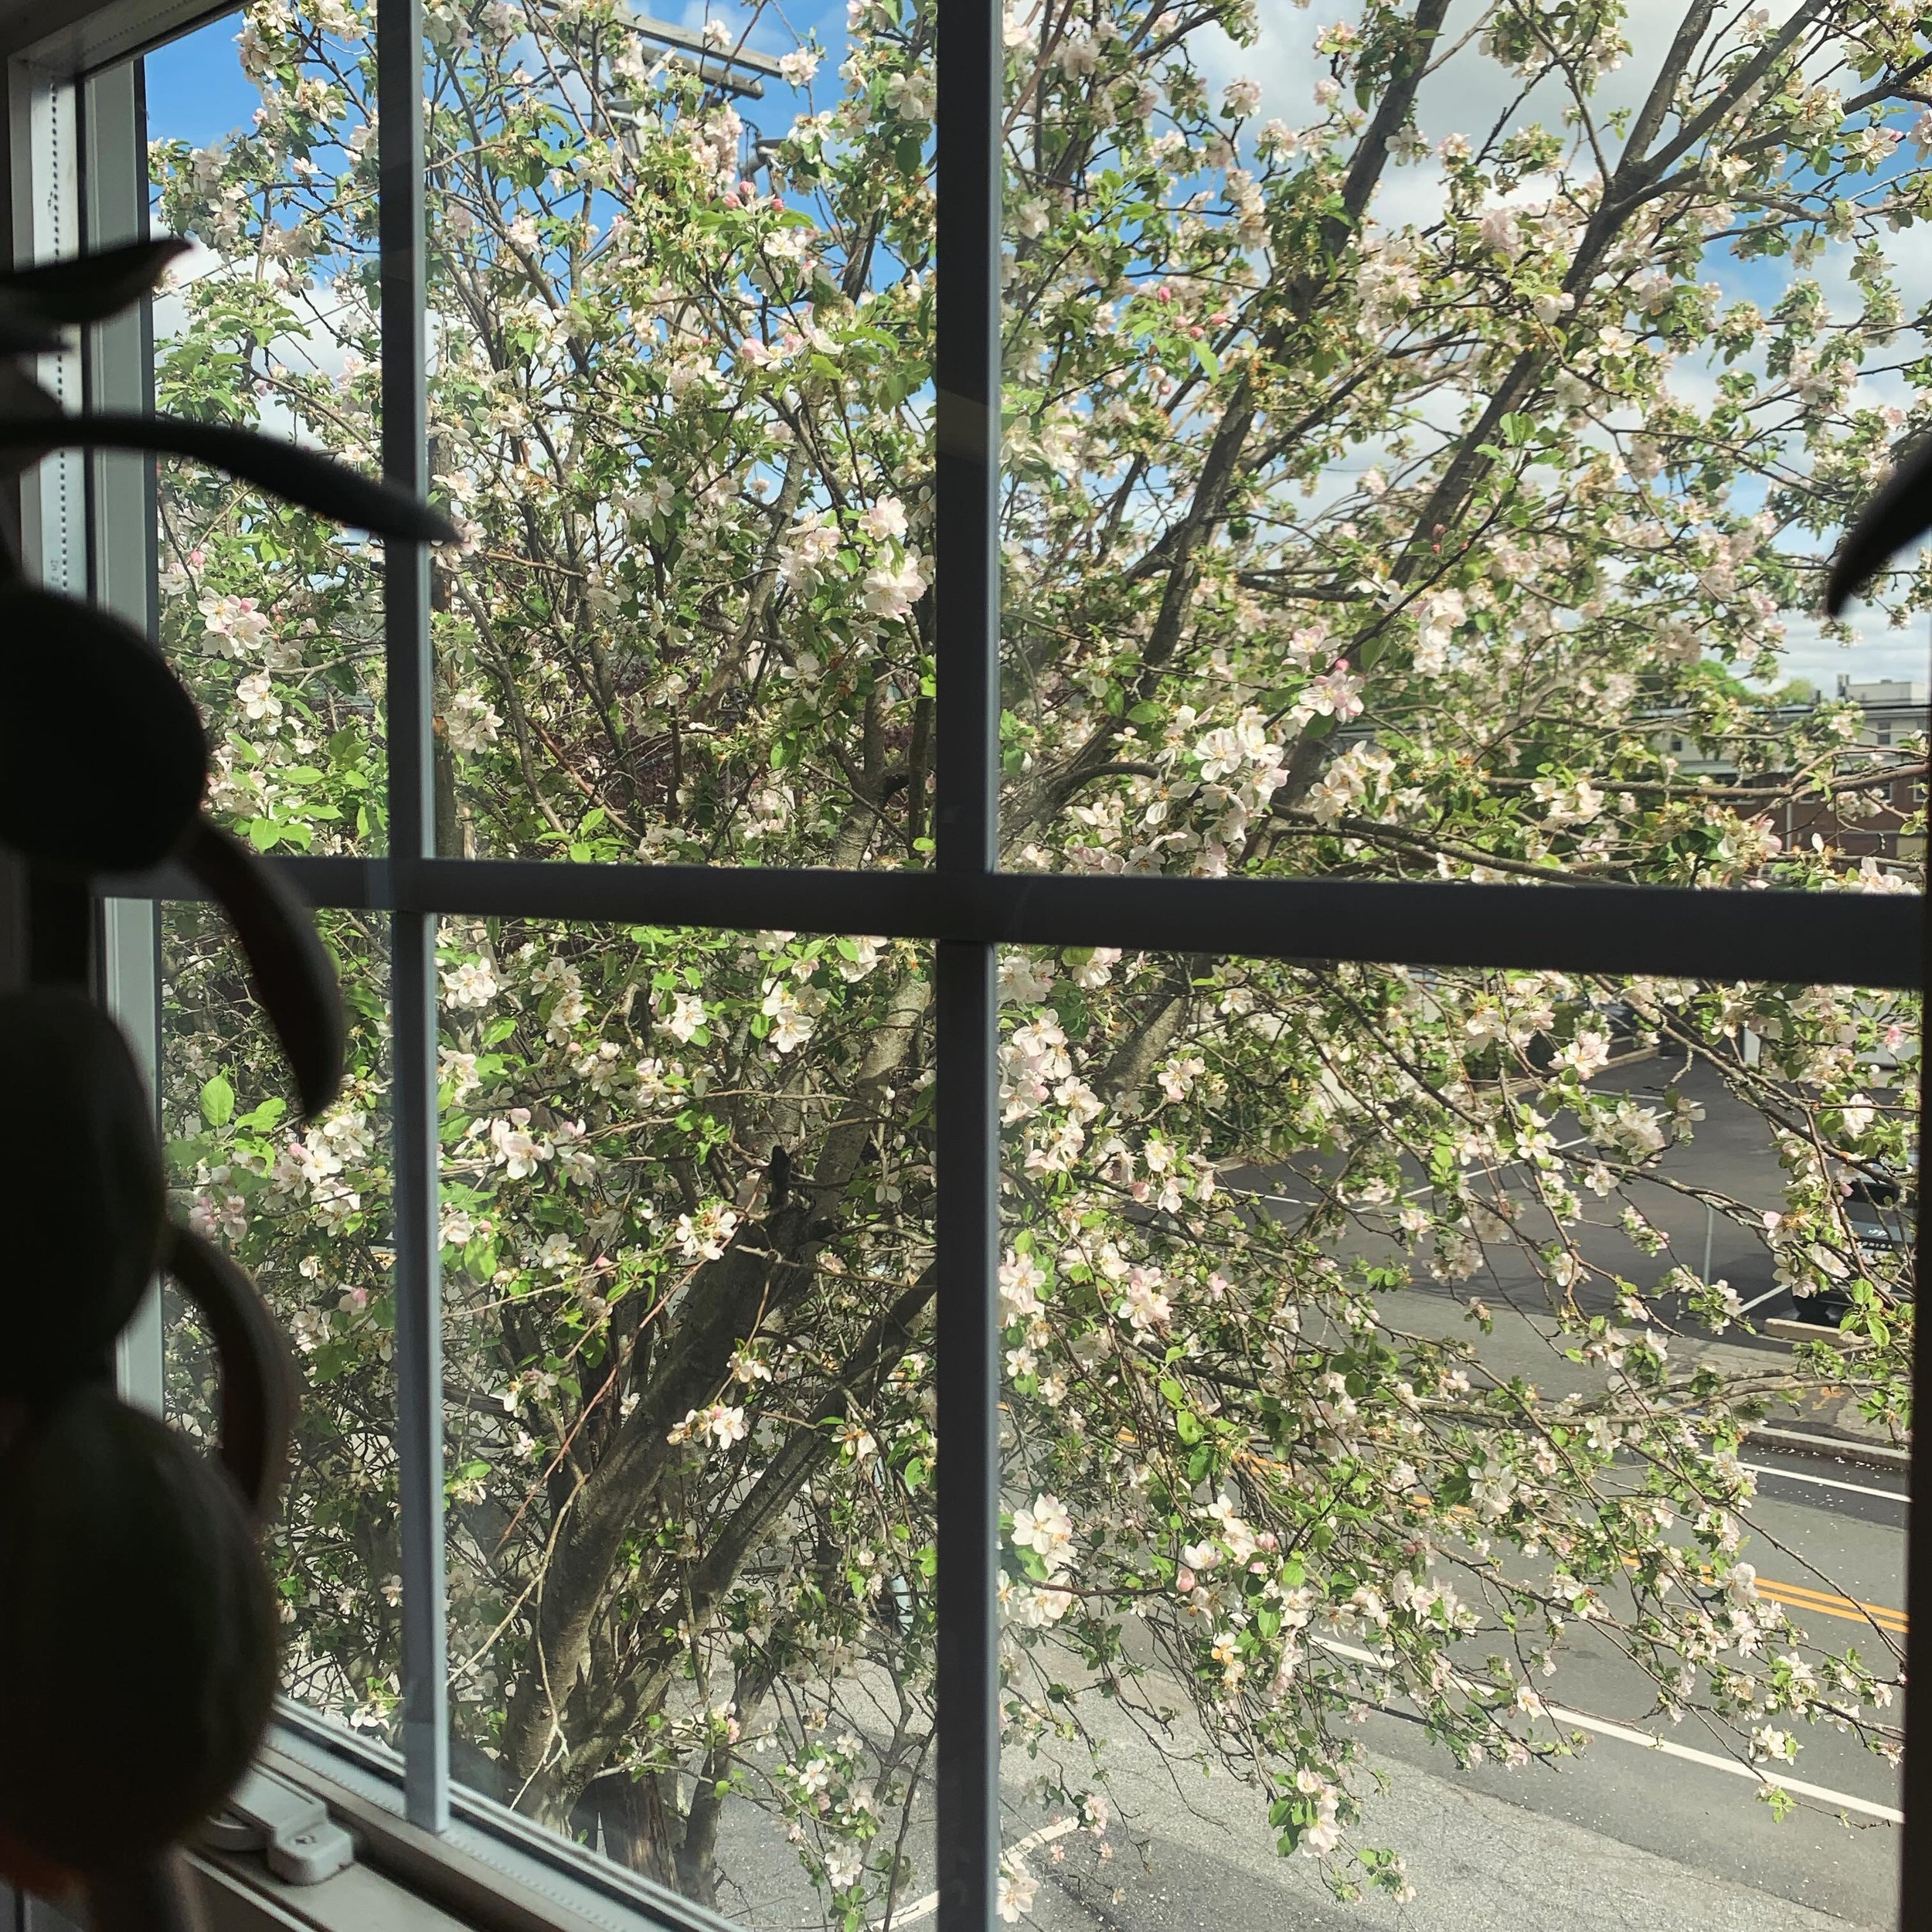 As green as it gets around my studio space. One apple tree and miles of blacktop. Suburbia&hellip; #springday #springcolors #studiopractice